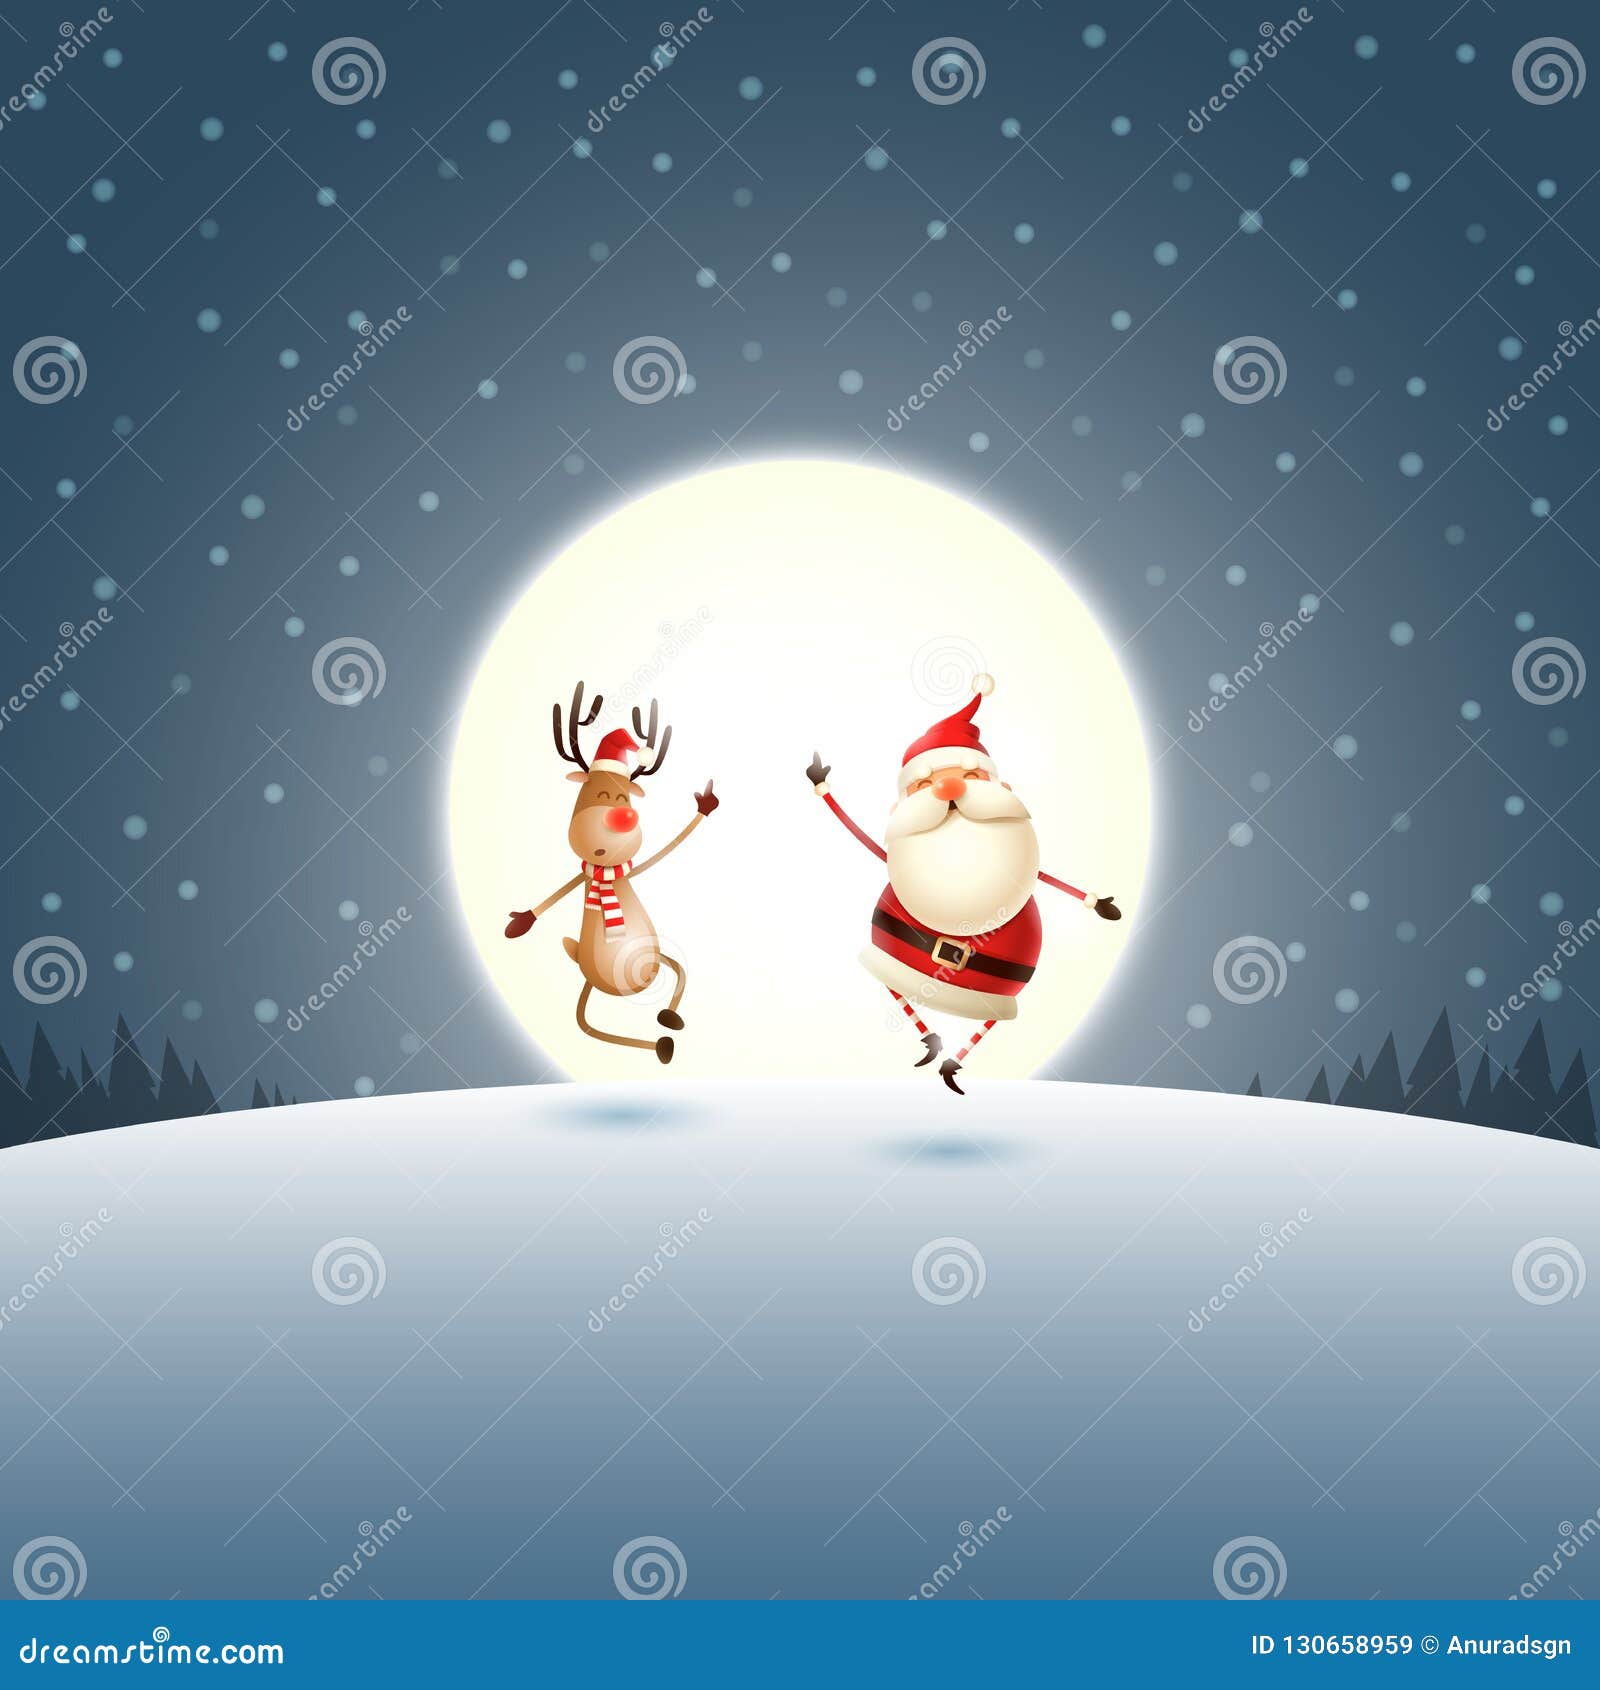 christmas funny poster - happy expresion of santa claus and reindeer - moonlight winter landscape